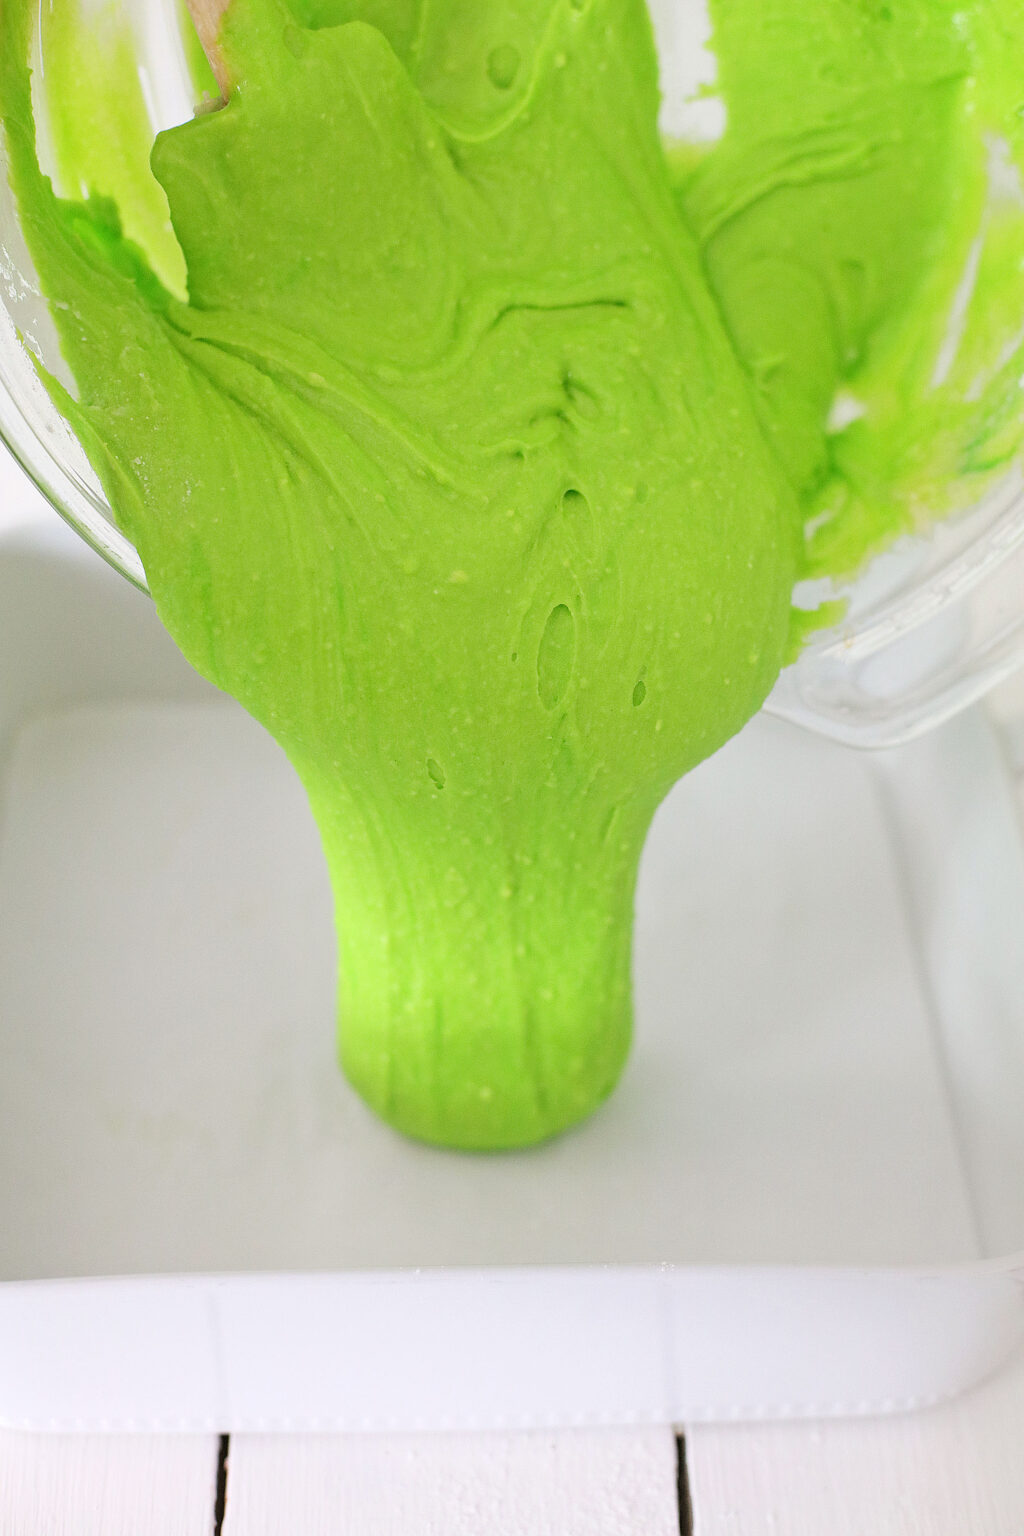 green brownie batter being poured into baking pan